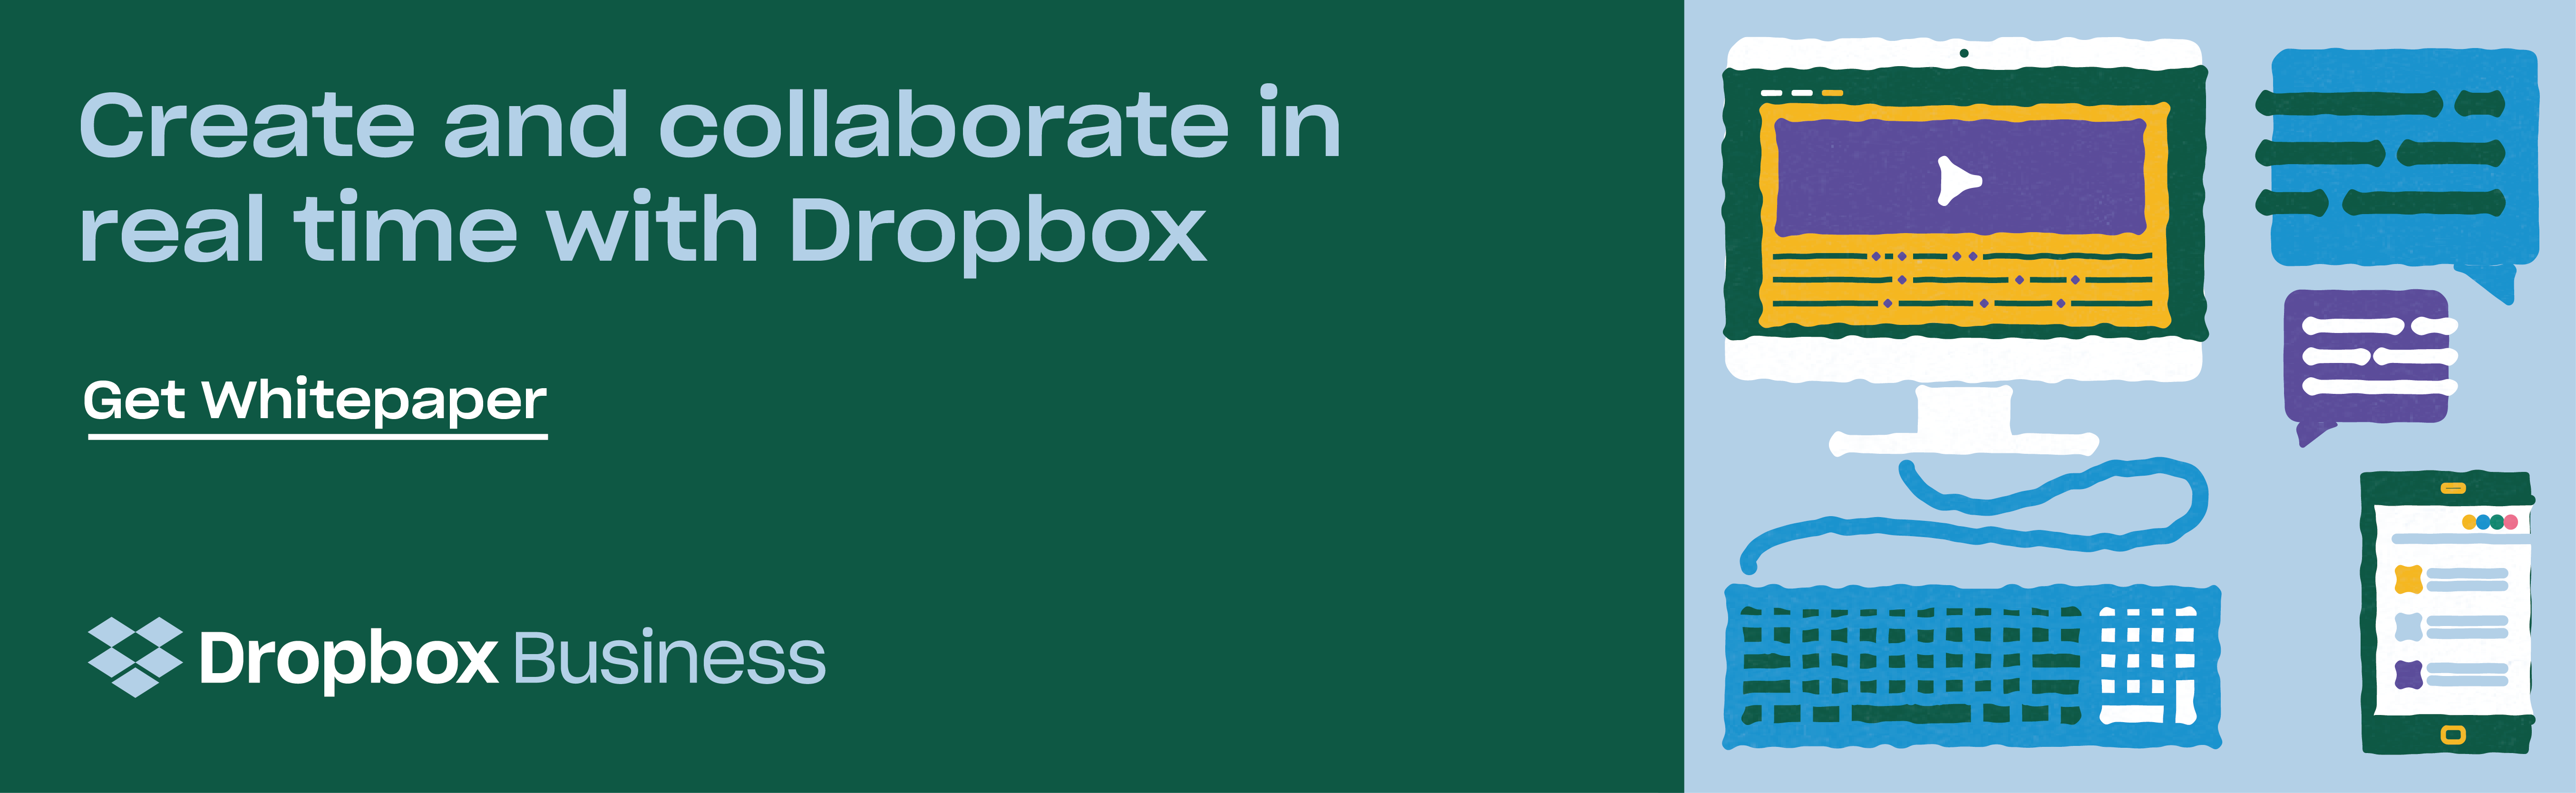 Create and collaborate in real time with Dropbox Business